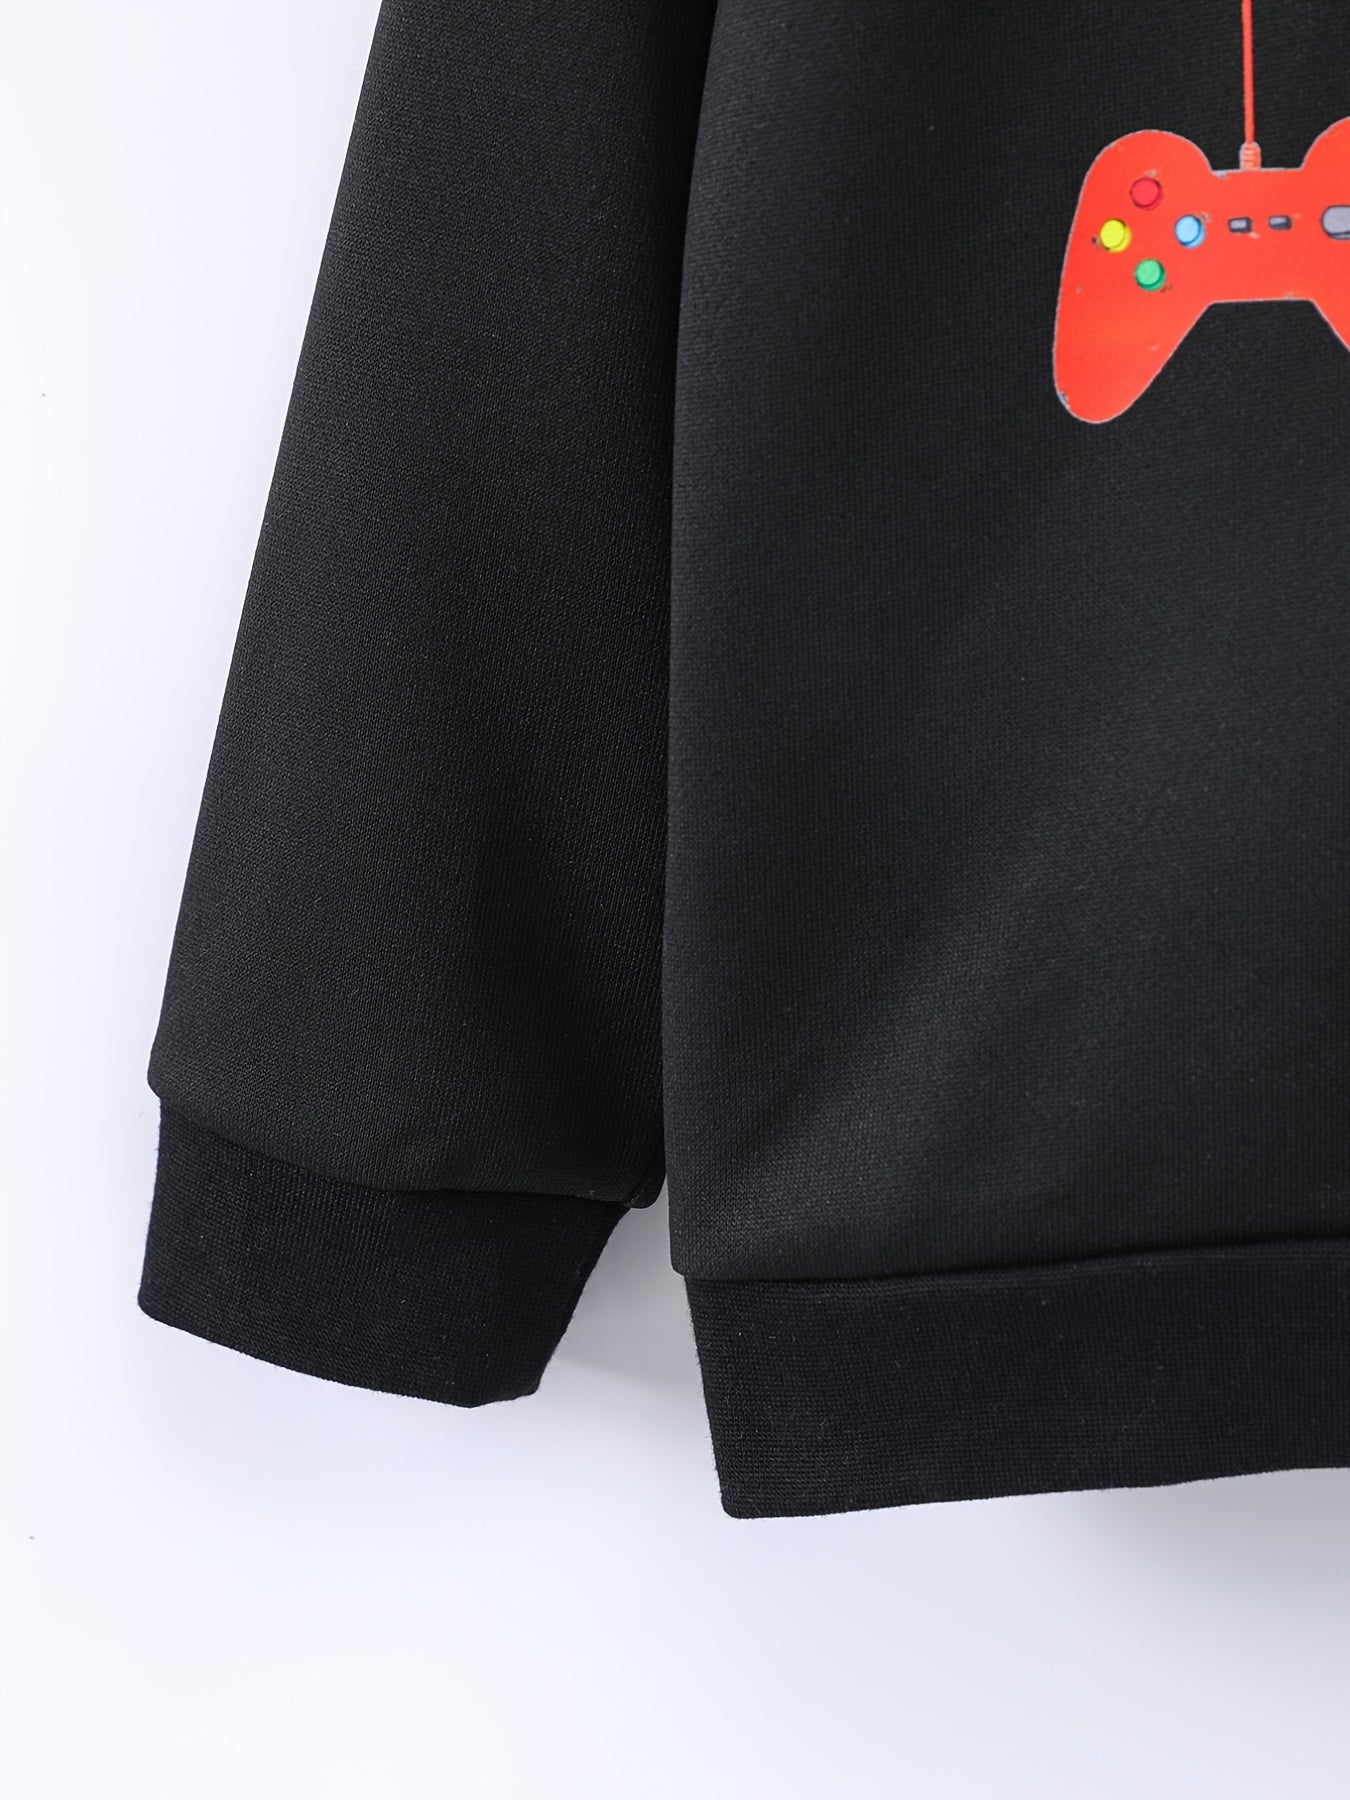 Colorful Gamepad Pattern Kid's Hoodie, Casual Long Sleeve Top, Boy's Clothes For Spring Fall